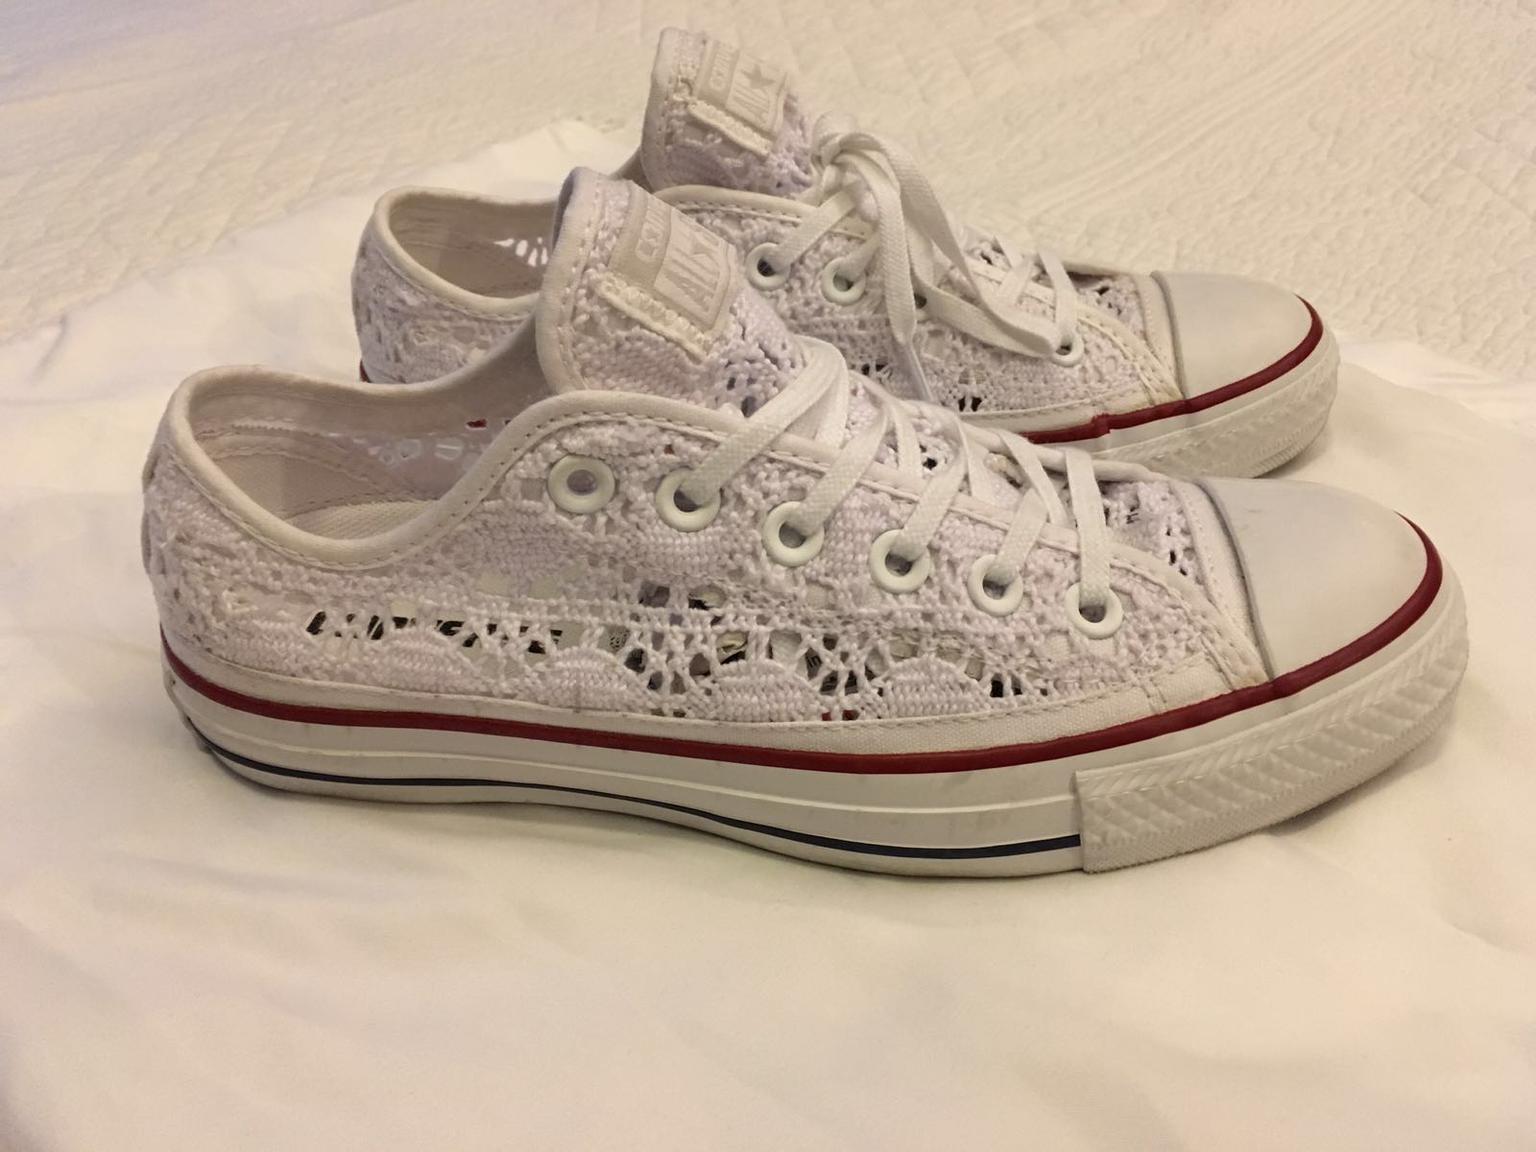 CONVERSE Uni Crochet (pizzo bianco) Nr. 37,5 in Bologna for €59.00 for sale  | Shpock